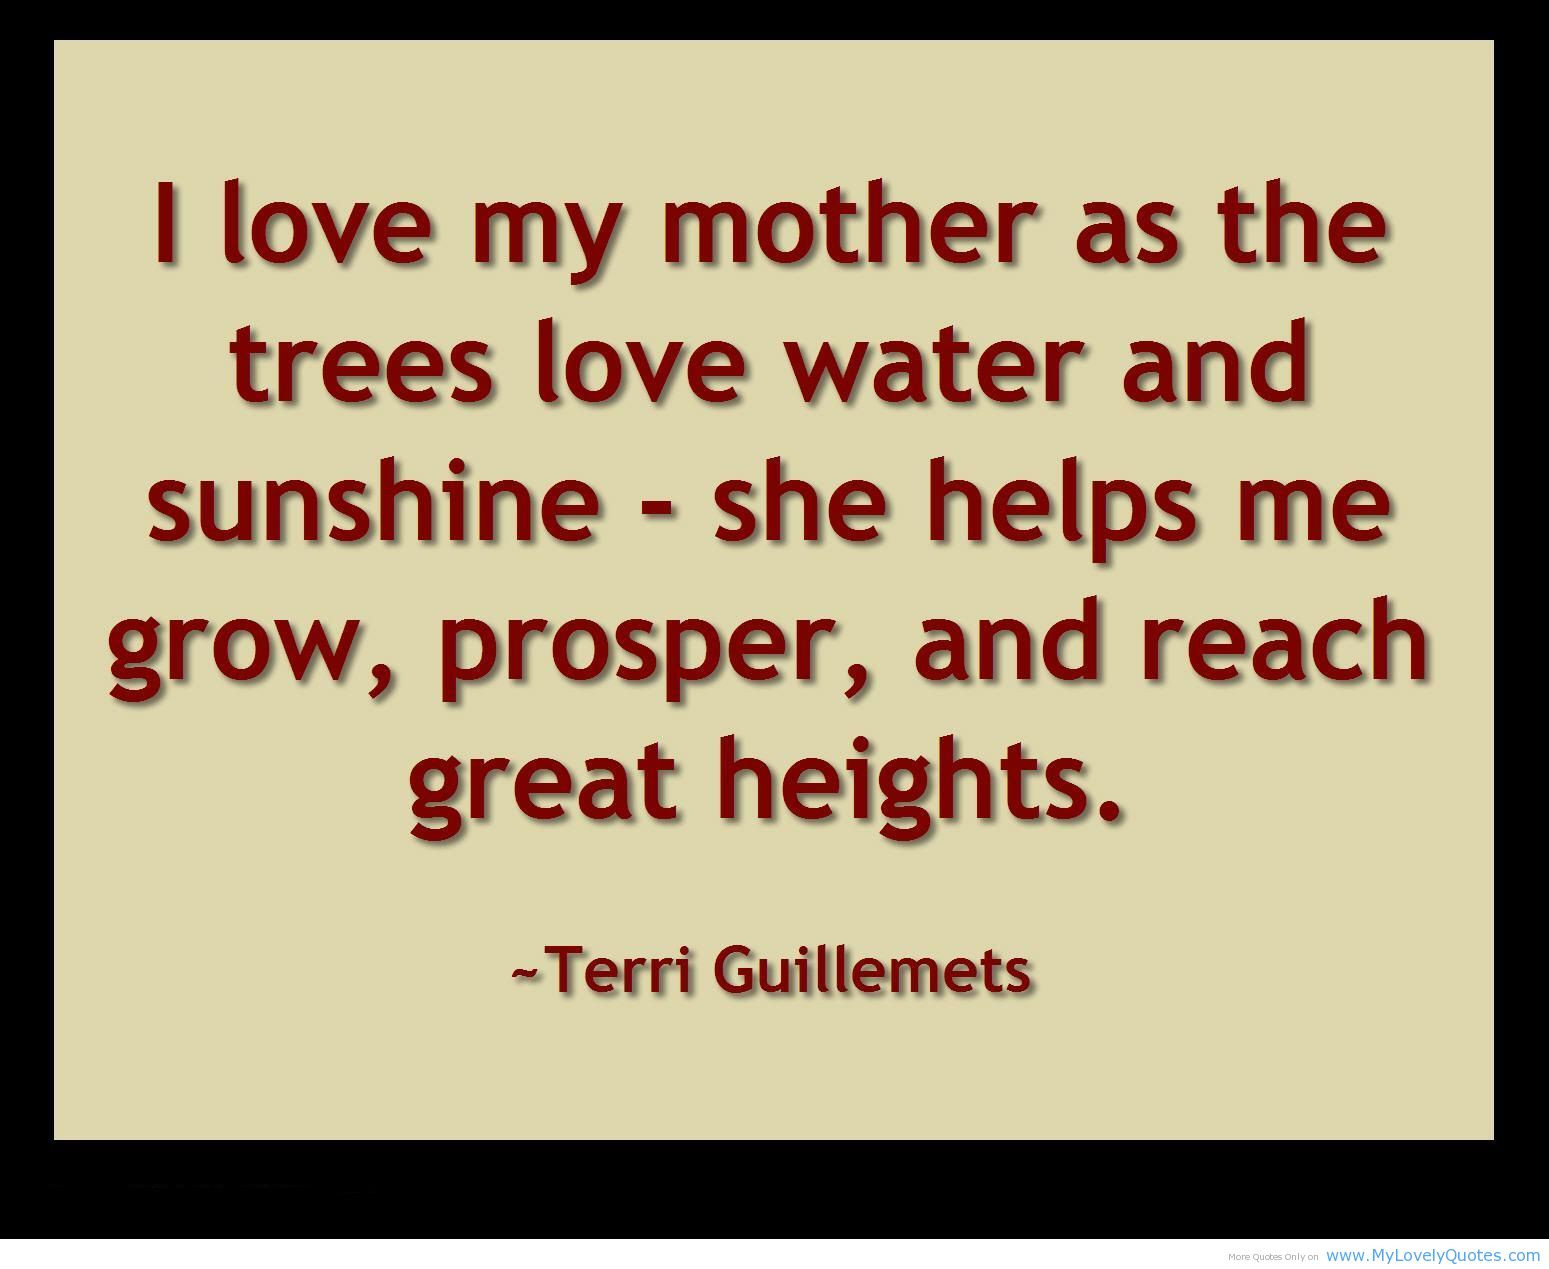 Motherhood Love Quotes
 Quotes About Mothers Love QuotesGram